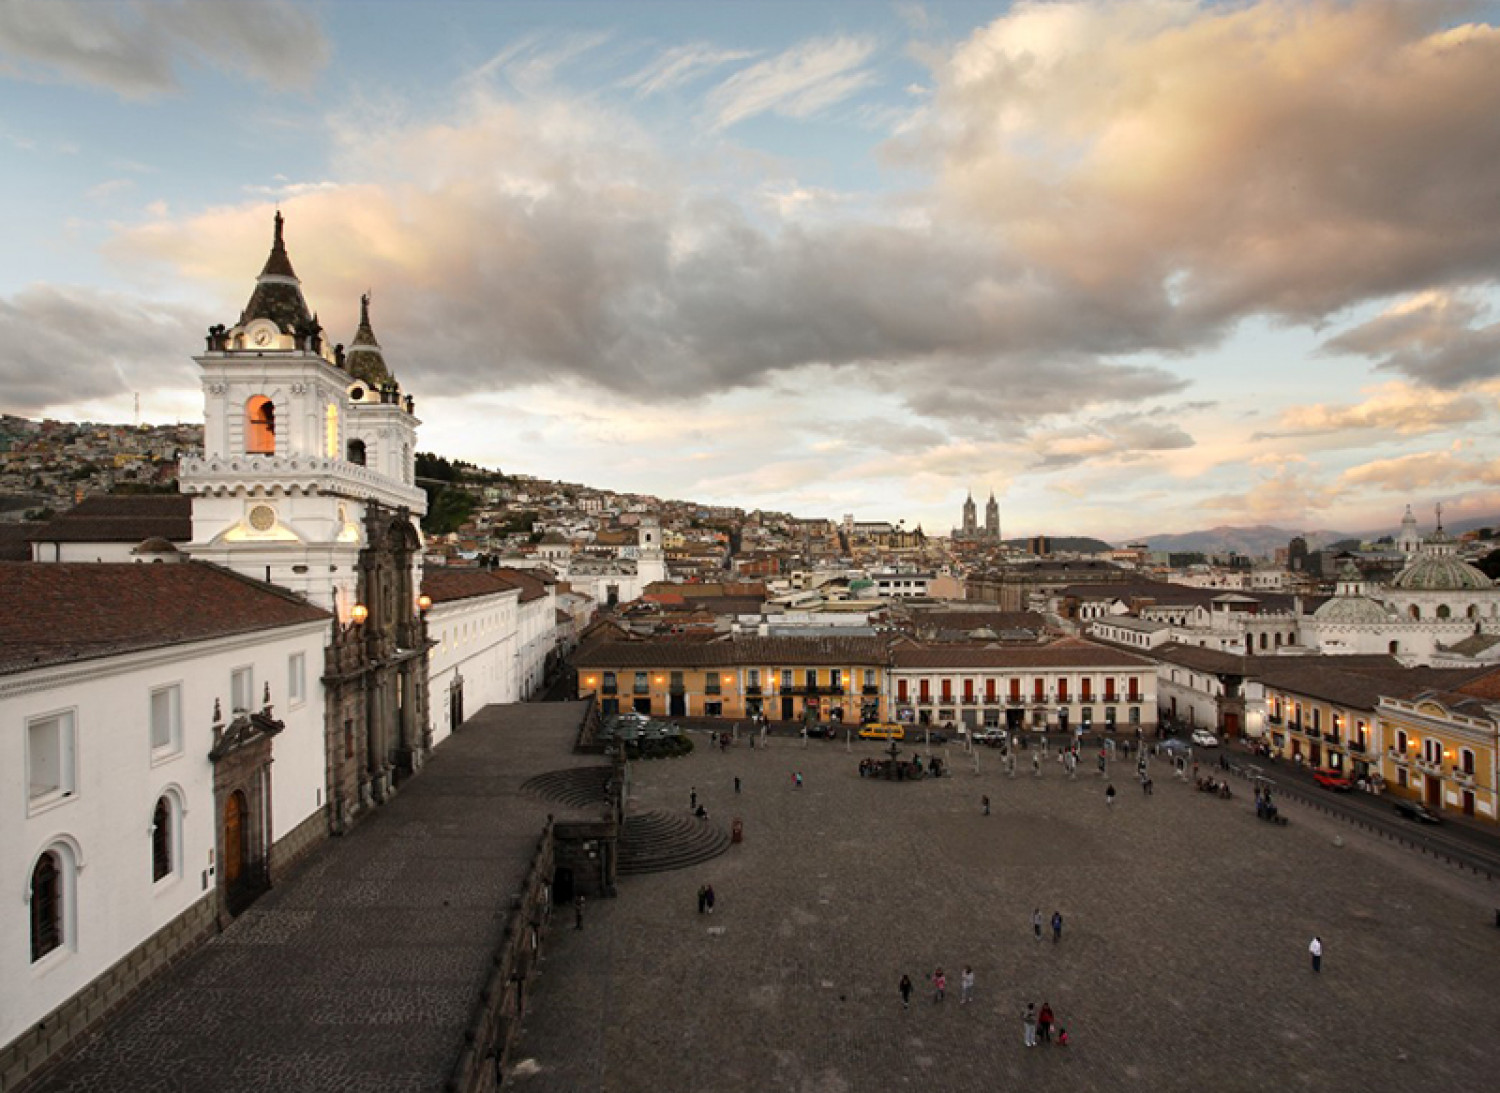 Sites dating best are Quito in the what Guide On